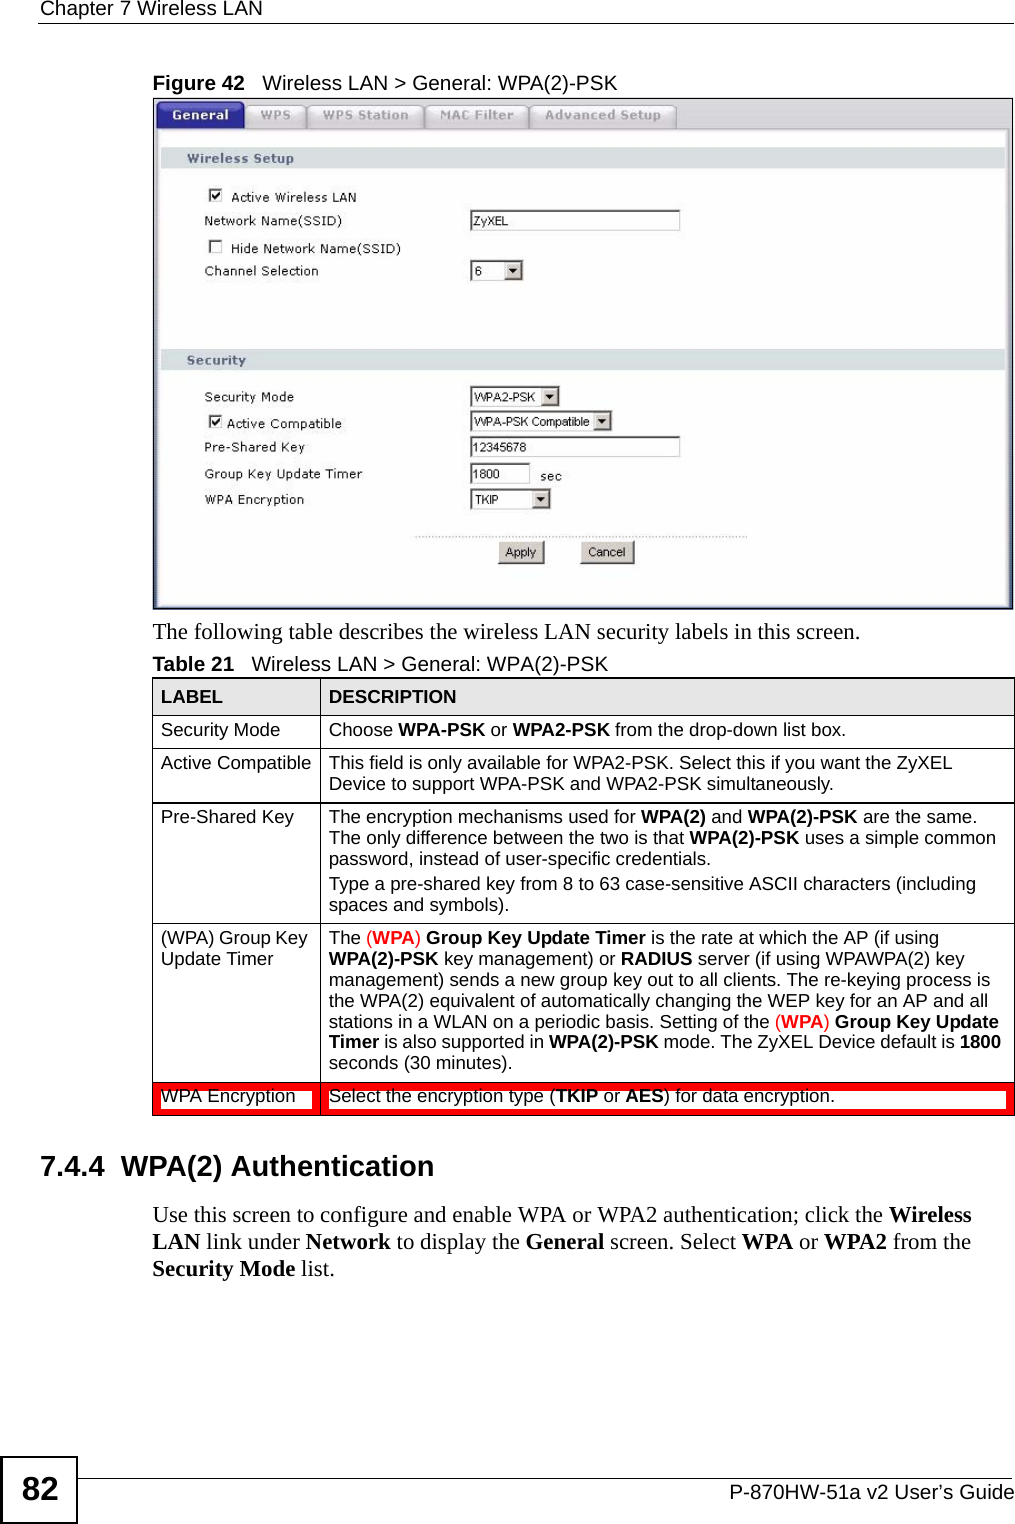 Chapter 7 Wireless LANP-870HW-51a v2 User’s Guide82Figure 42   Wireless LAN &gt; General: WPA(2)-PSKThe following table describes the wireless LAN security labels in this screen.7.4.4  WPA(2) AuthenticationUse this screen to configure and enable WPA or WPA2 authentication; click the Wireless LAN link under Network to display the General screen. Select WPA or WPA2 from the Security Mode list.Table 21   Wireless LAN &gt; General: WPA(2)-PSKLABEL DESCRIPTIONSecurity Mode Choose WPA-PSK or WPA2-PSK from the drop-down list box.Active Compatible This field is only available for WPA2-PSK. Select this if you want the ZyXEL Device to support WPA-PSK and WPA2-PSK simultaneously.Pre-Shared Key  The encryption mechanisms used for WPA(2) and WPA(2)-PSK are the same. The only difference between the two is that WPA(2)-PSK uses a simple common password, instead of user-specific credentials.Type a pre-shared key from 8 to 63 case-sensitive ASCII characters (including spaces and symbols).(WPA) Group Key Update Timer The (WPA) Group Key Update Timer is the rate at which the AP (if using WPA(2)-PSK key management) or RADIUS server (if using WPAWPA(2) key management) sends a new group key out to all clients. The re-keying process is the WPA(2) equivalent of automatically changing the WEP key for an AP and all stations in a WLAN on a periodic basis. Setting of the (WPA) Group Key Update Timer is also supported in WPA(2)-PSK mode. The ZyXEL Device default is 1800 seconds (30 minutes).WPA Encryption Select the encryption type (TKIP or AES) for data encryption.